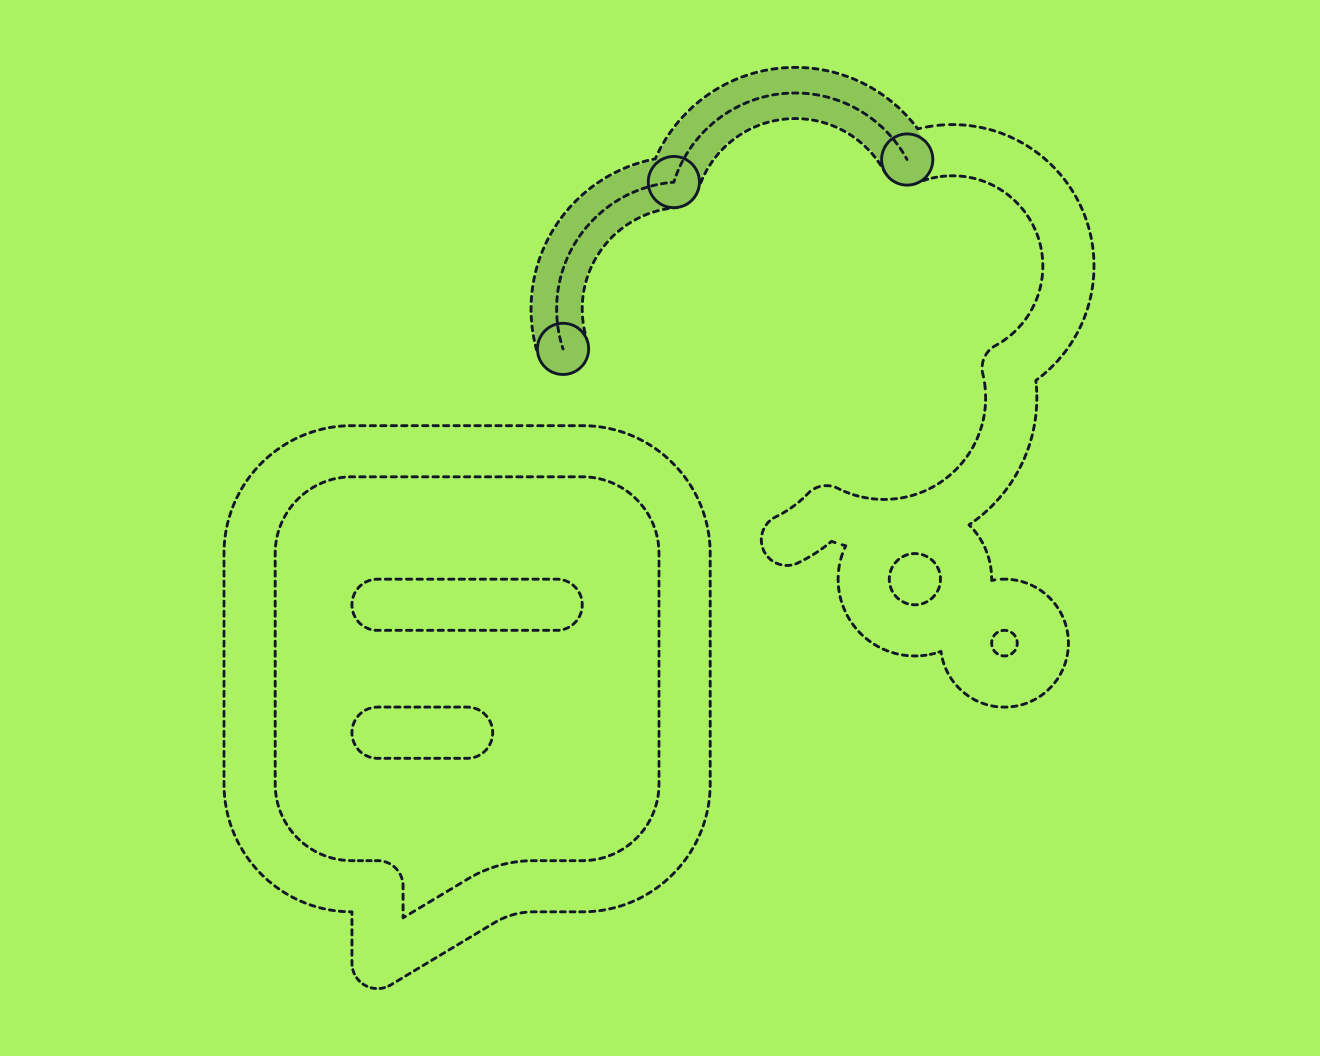 scaled up, graphical view of one of the icons Yummygum created for Classroomscreen on a green background, showing dotted outlines to indicate the attention to detail spent